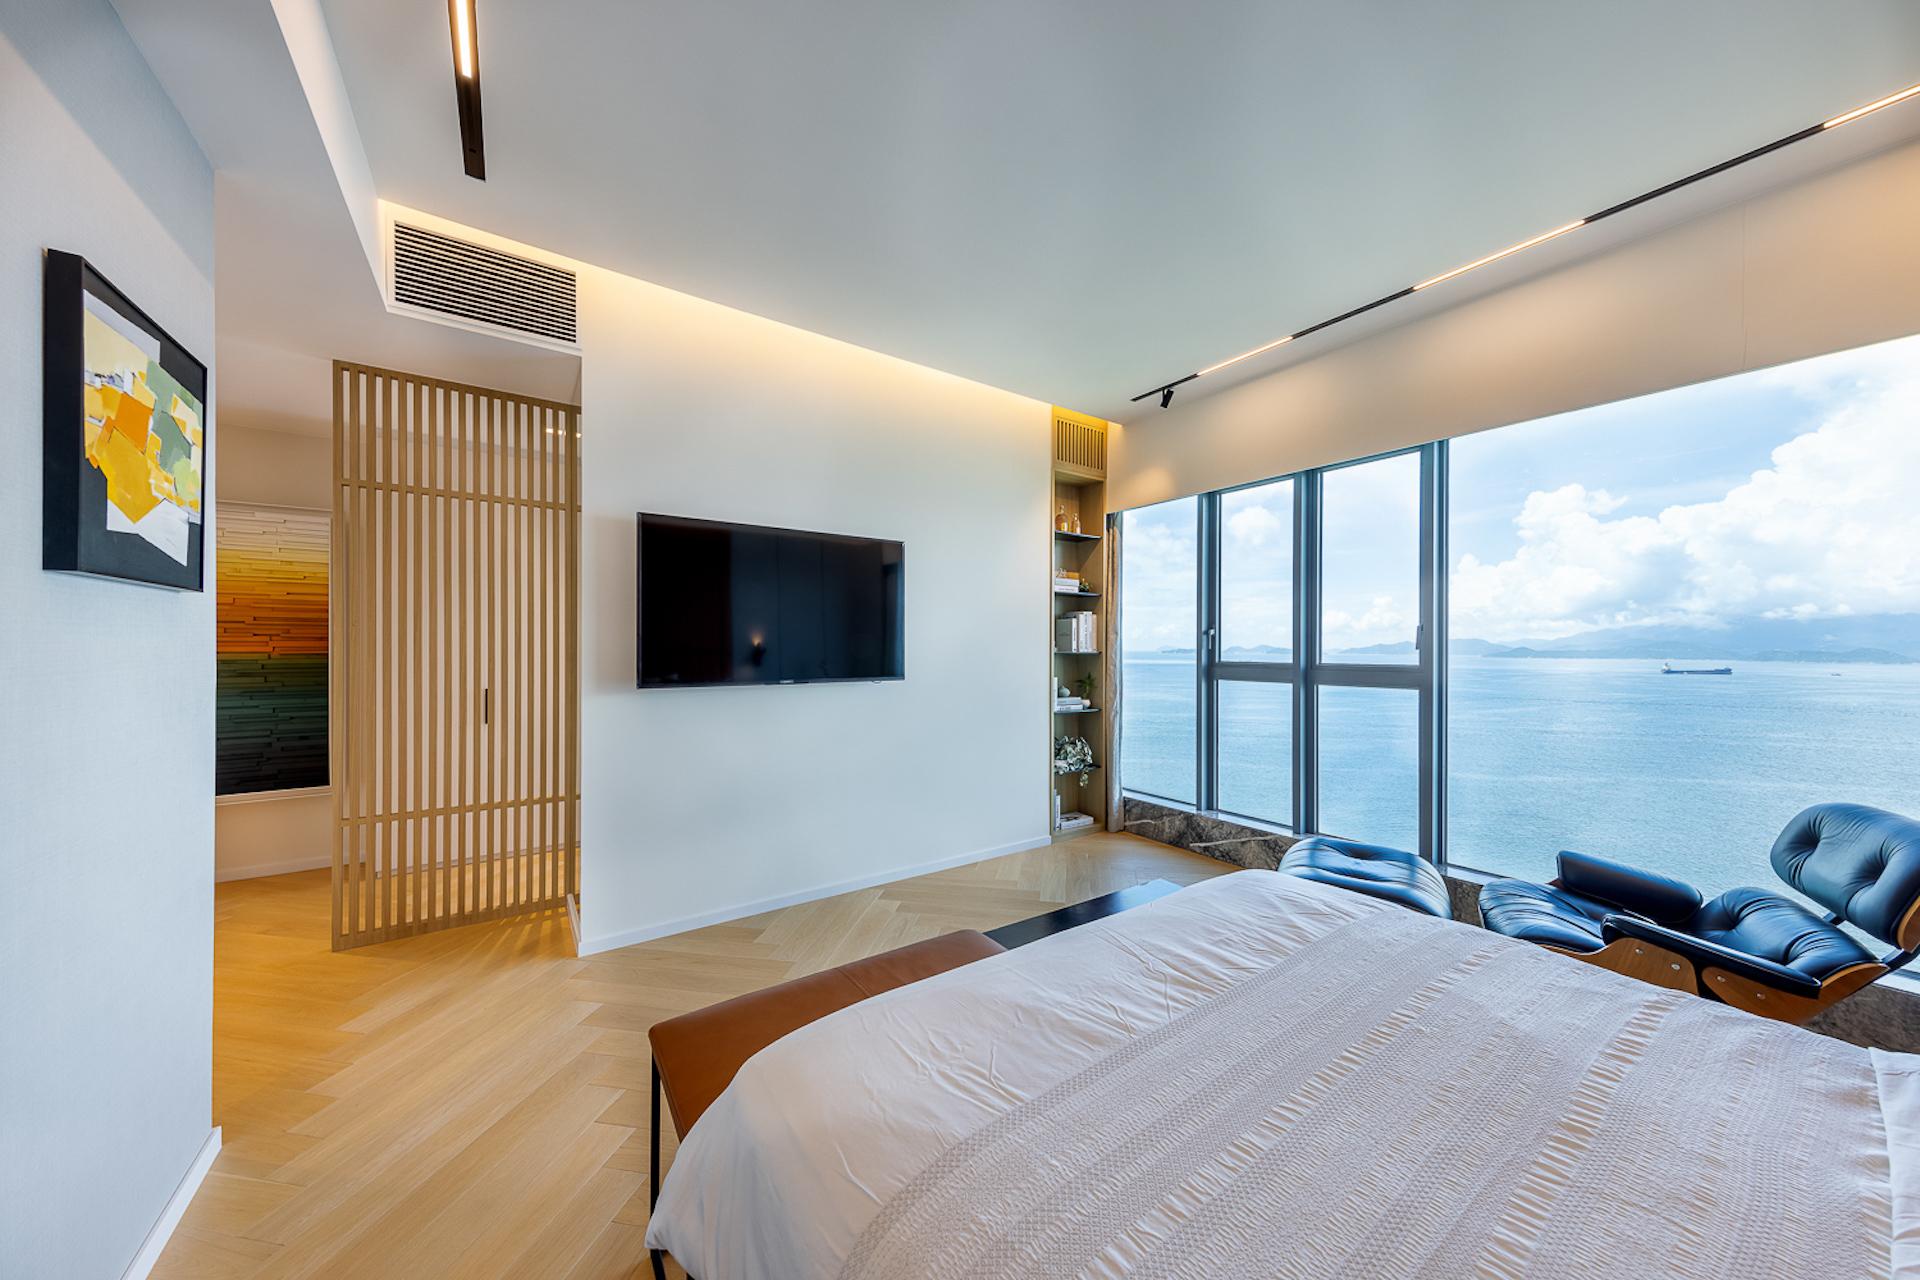 Inside a Family’s Sprawling 2,000-sq.ft. Home in Hong Kong’s Southside